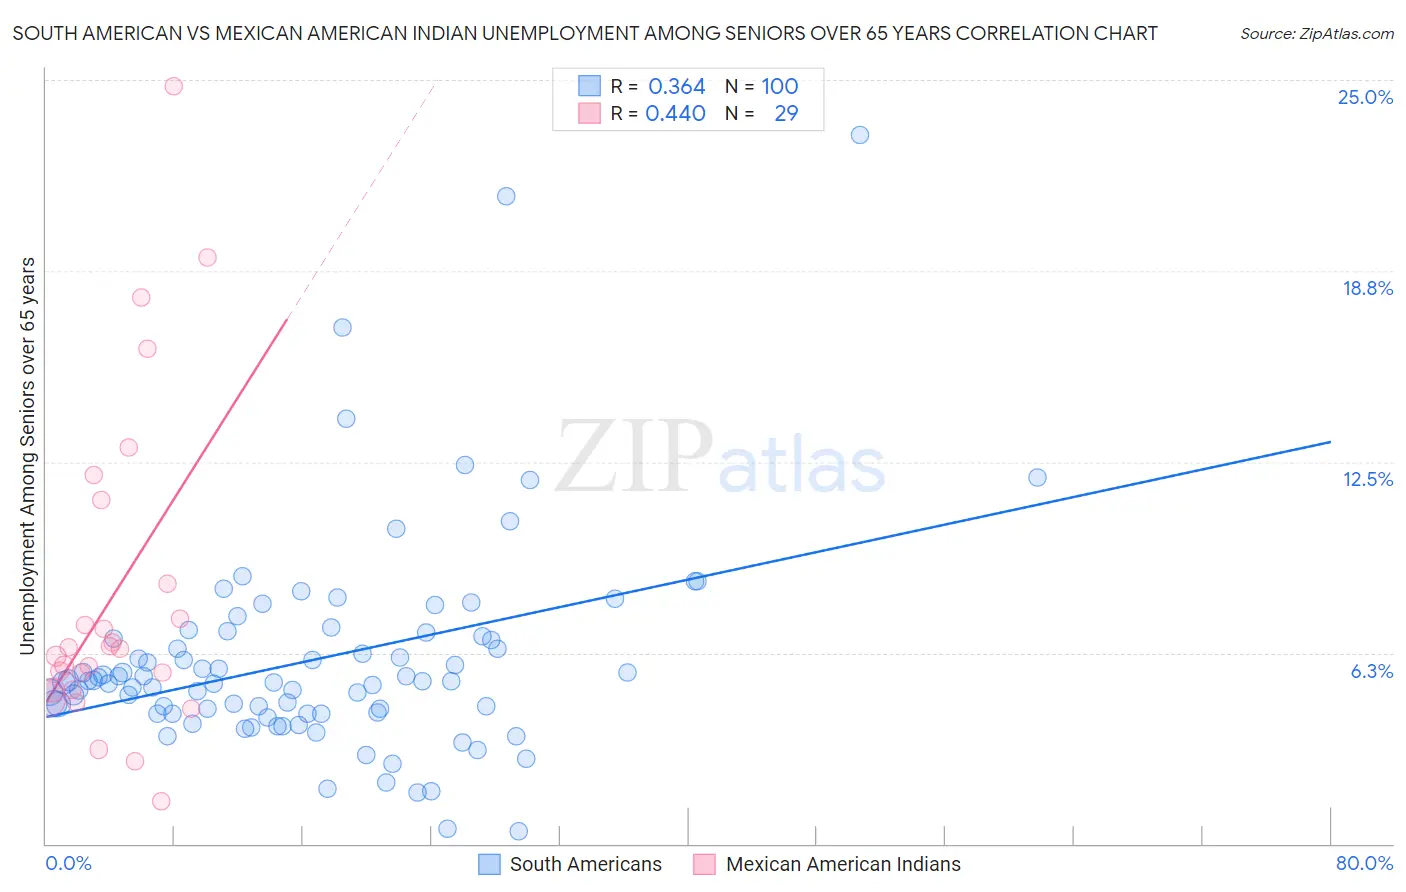 South American vs Mexican American Indian Unemployment Among Seniors over 65 years